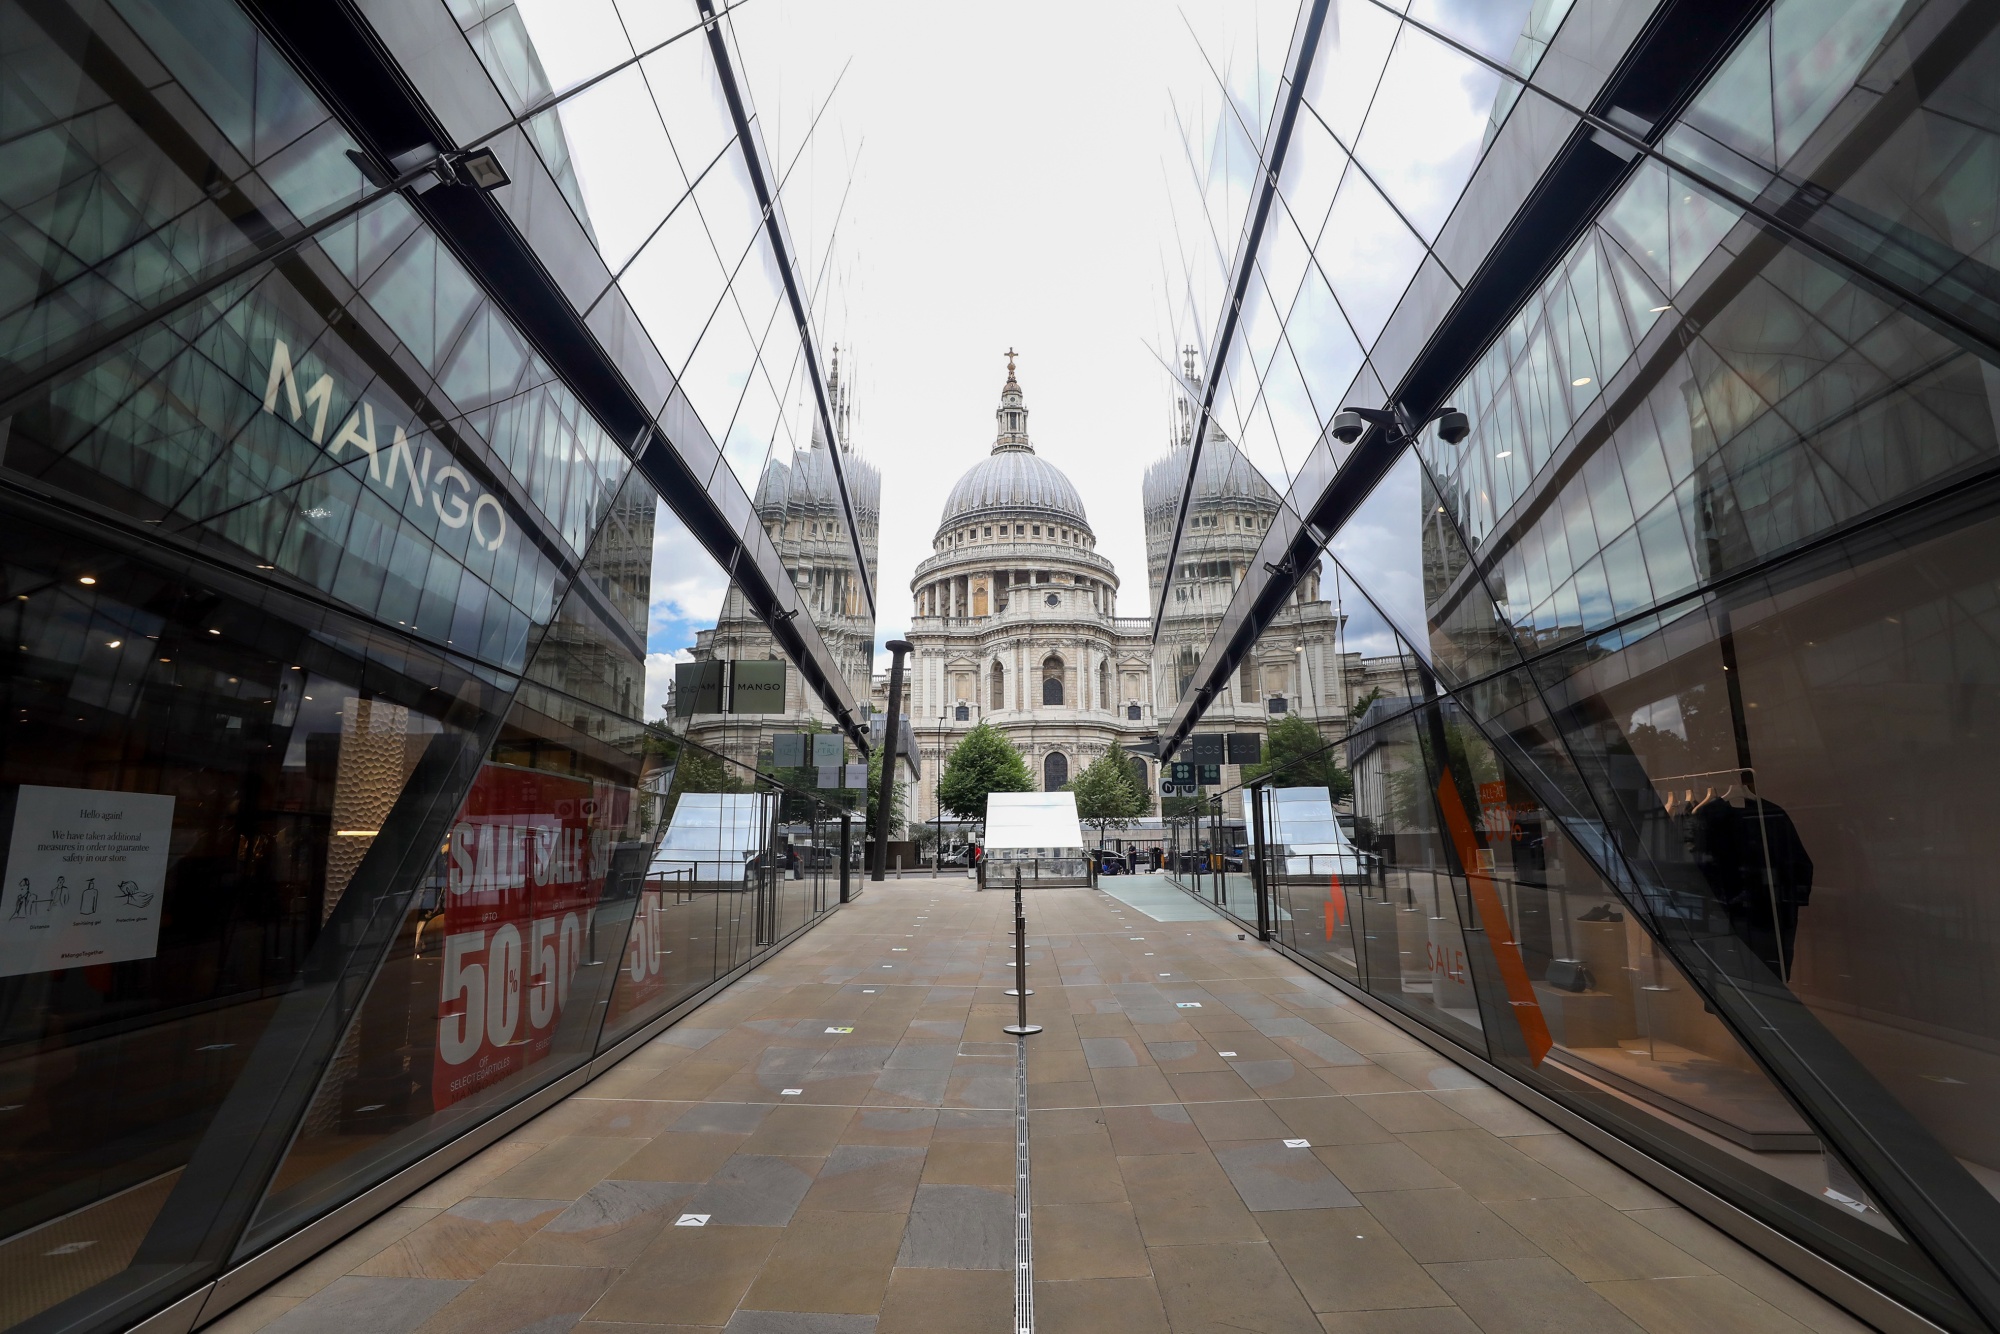 St Paul's cathedral stands at the end of One New Change shopping centre on Cheapside in the City of London.